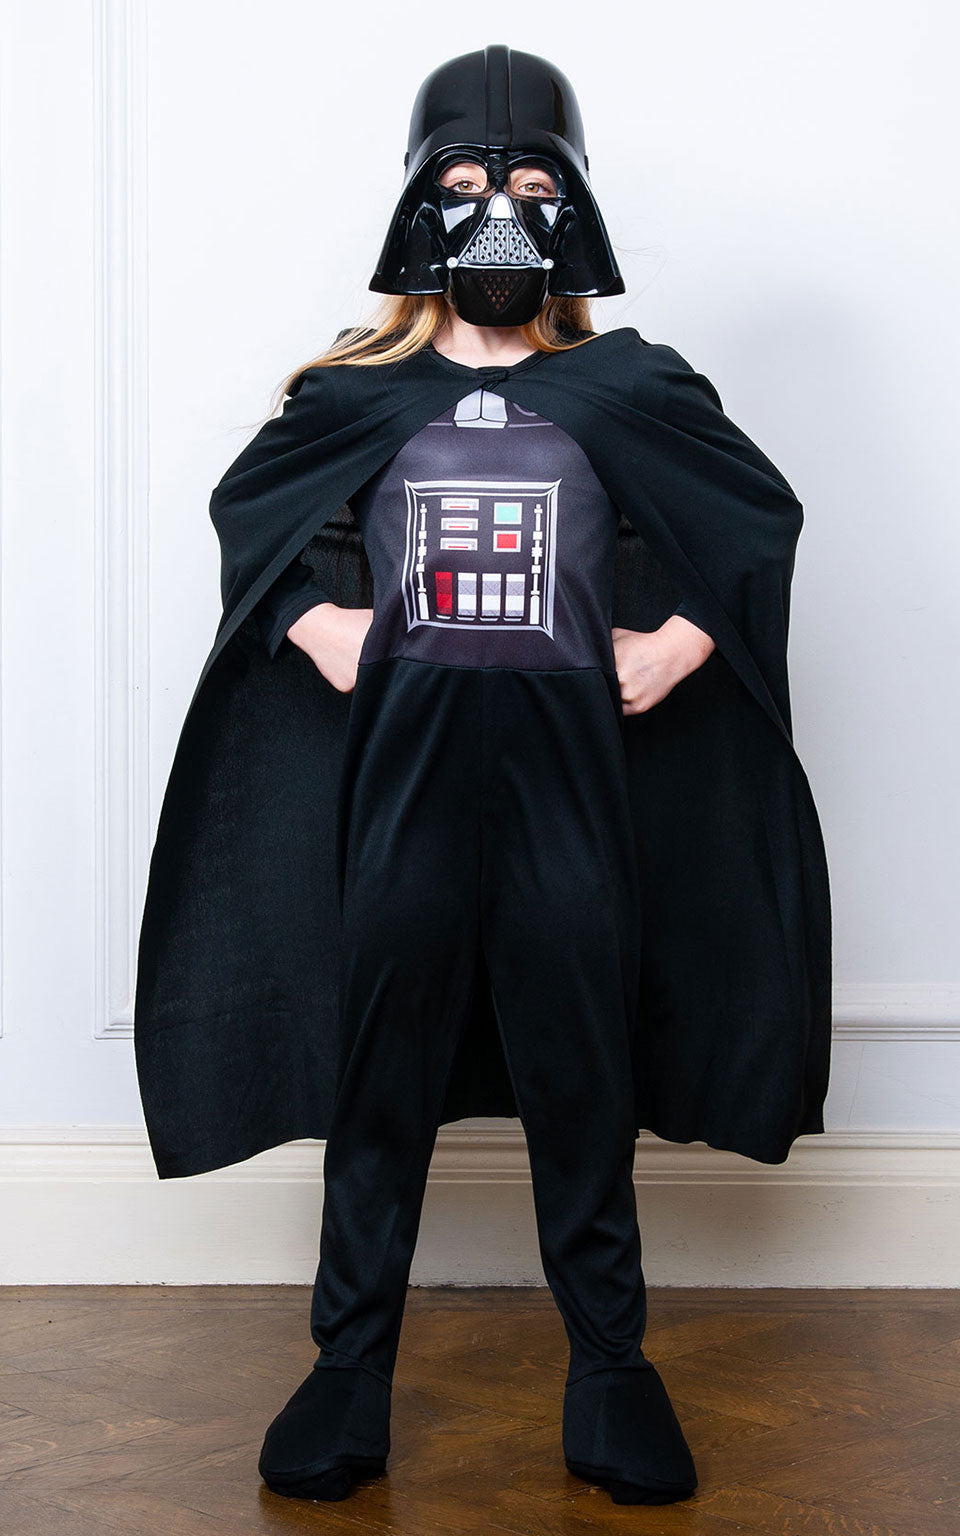 Darth Vader Sith Lord Childrens Costume with Cape and Mask 2 rub-641066M MAD Fancy Dress